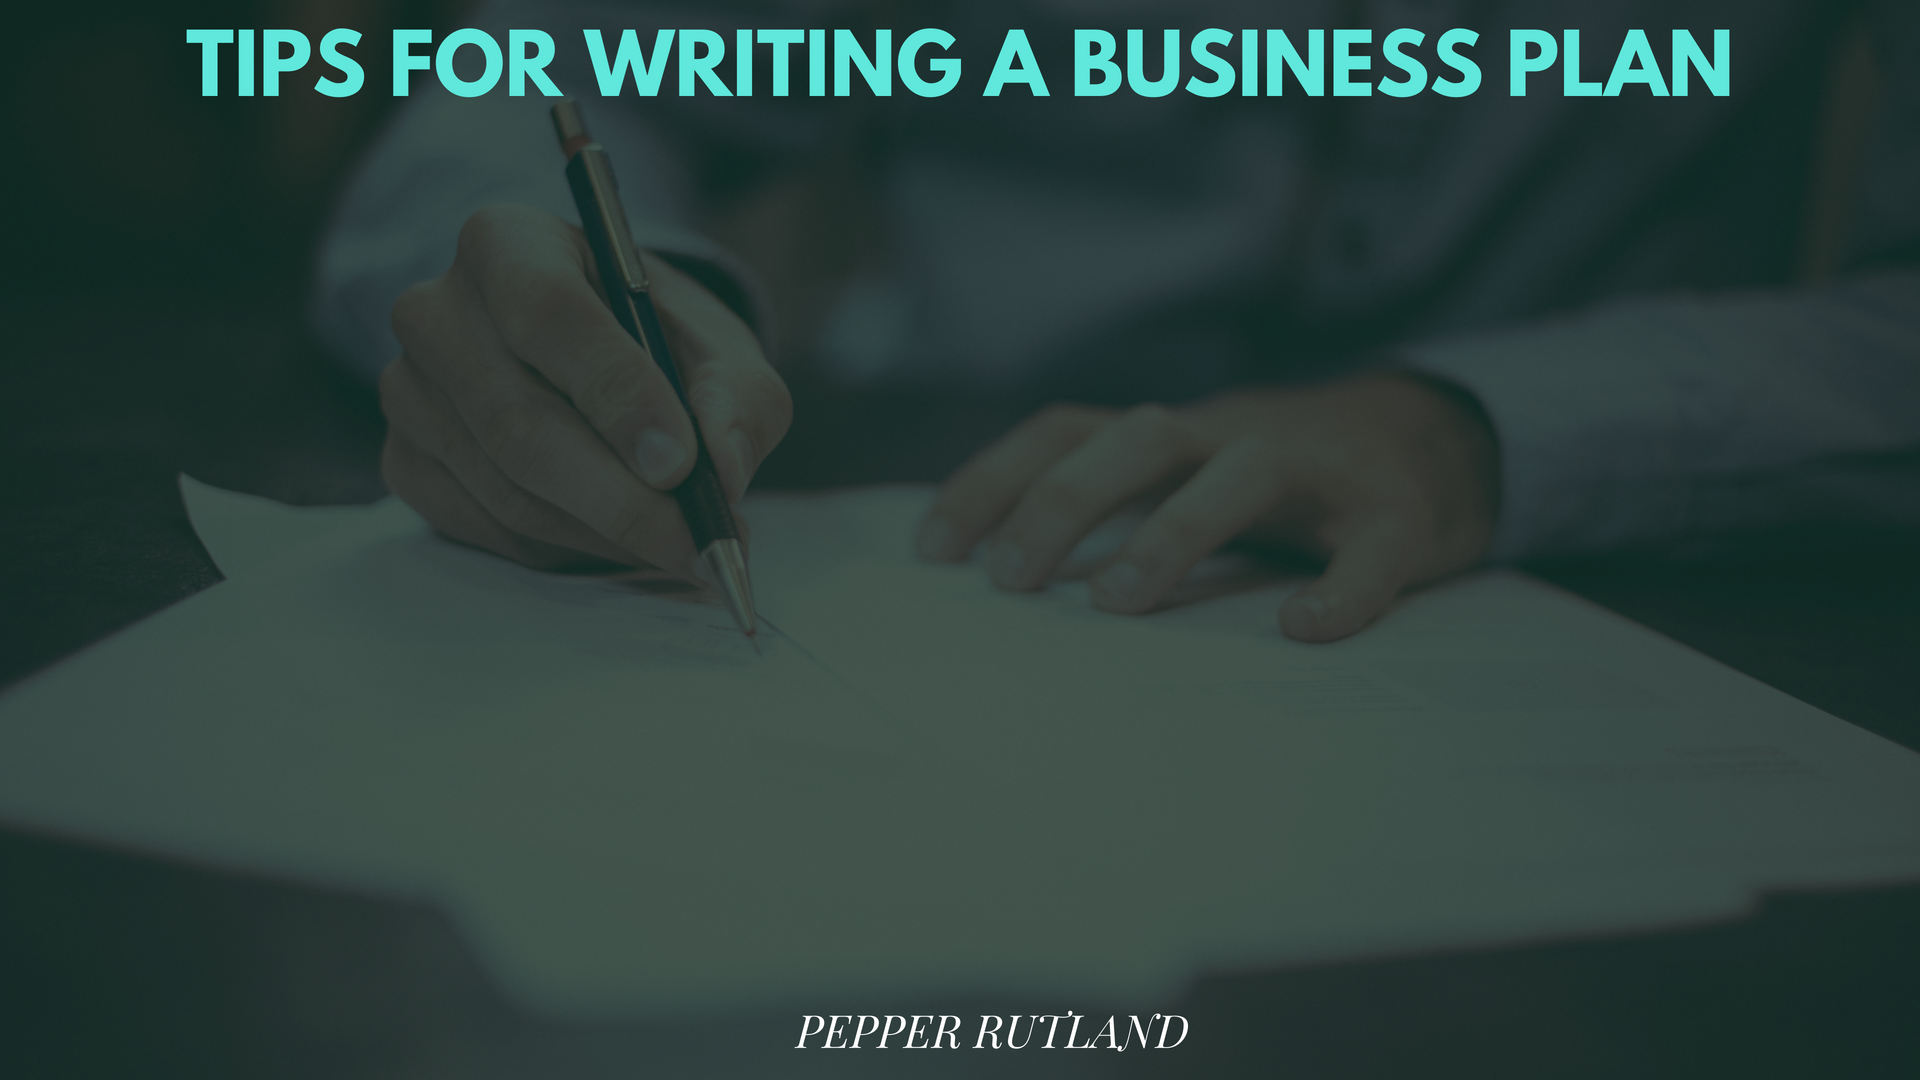 Tips for Writing a Business Plan